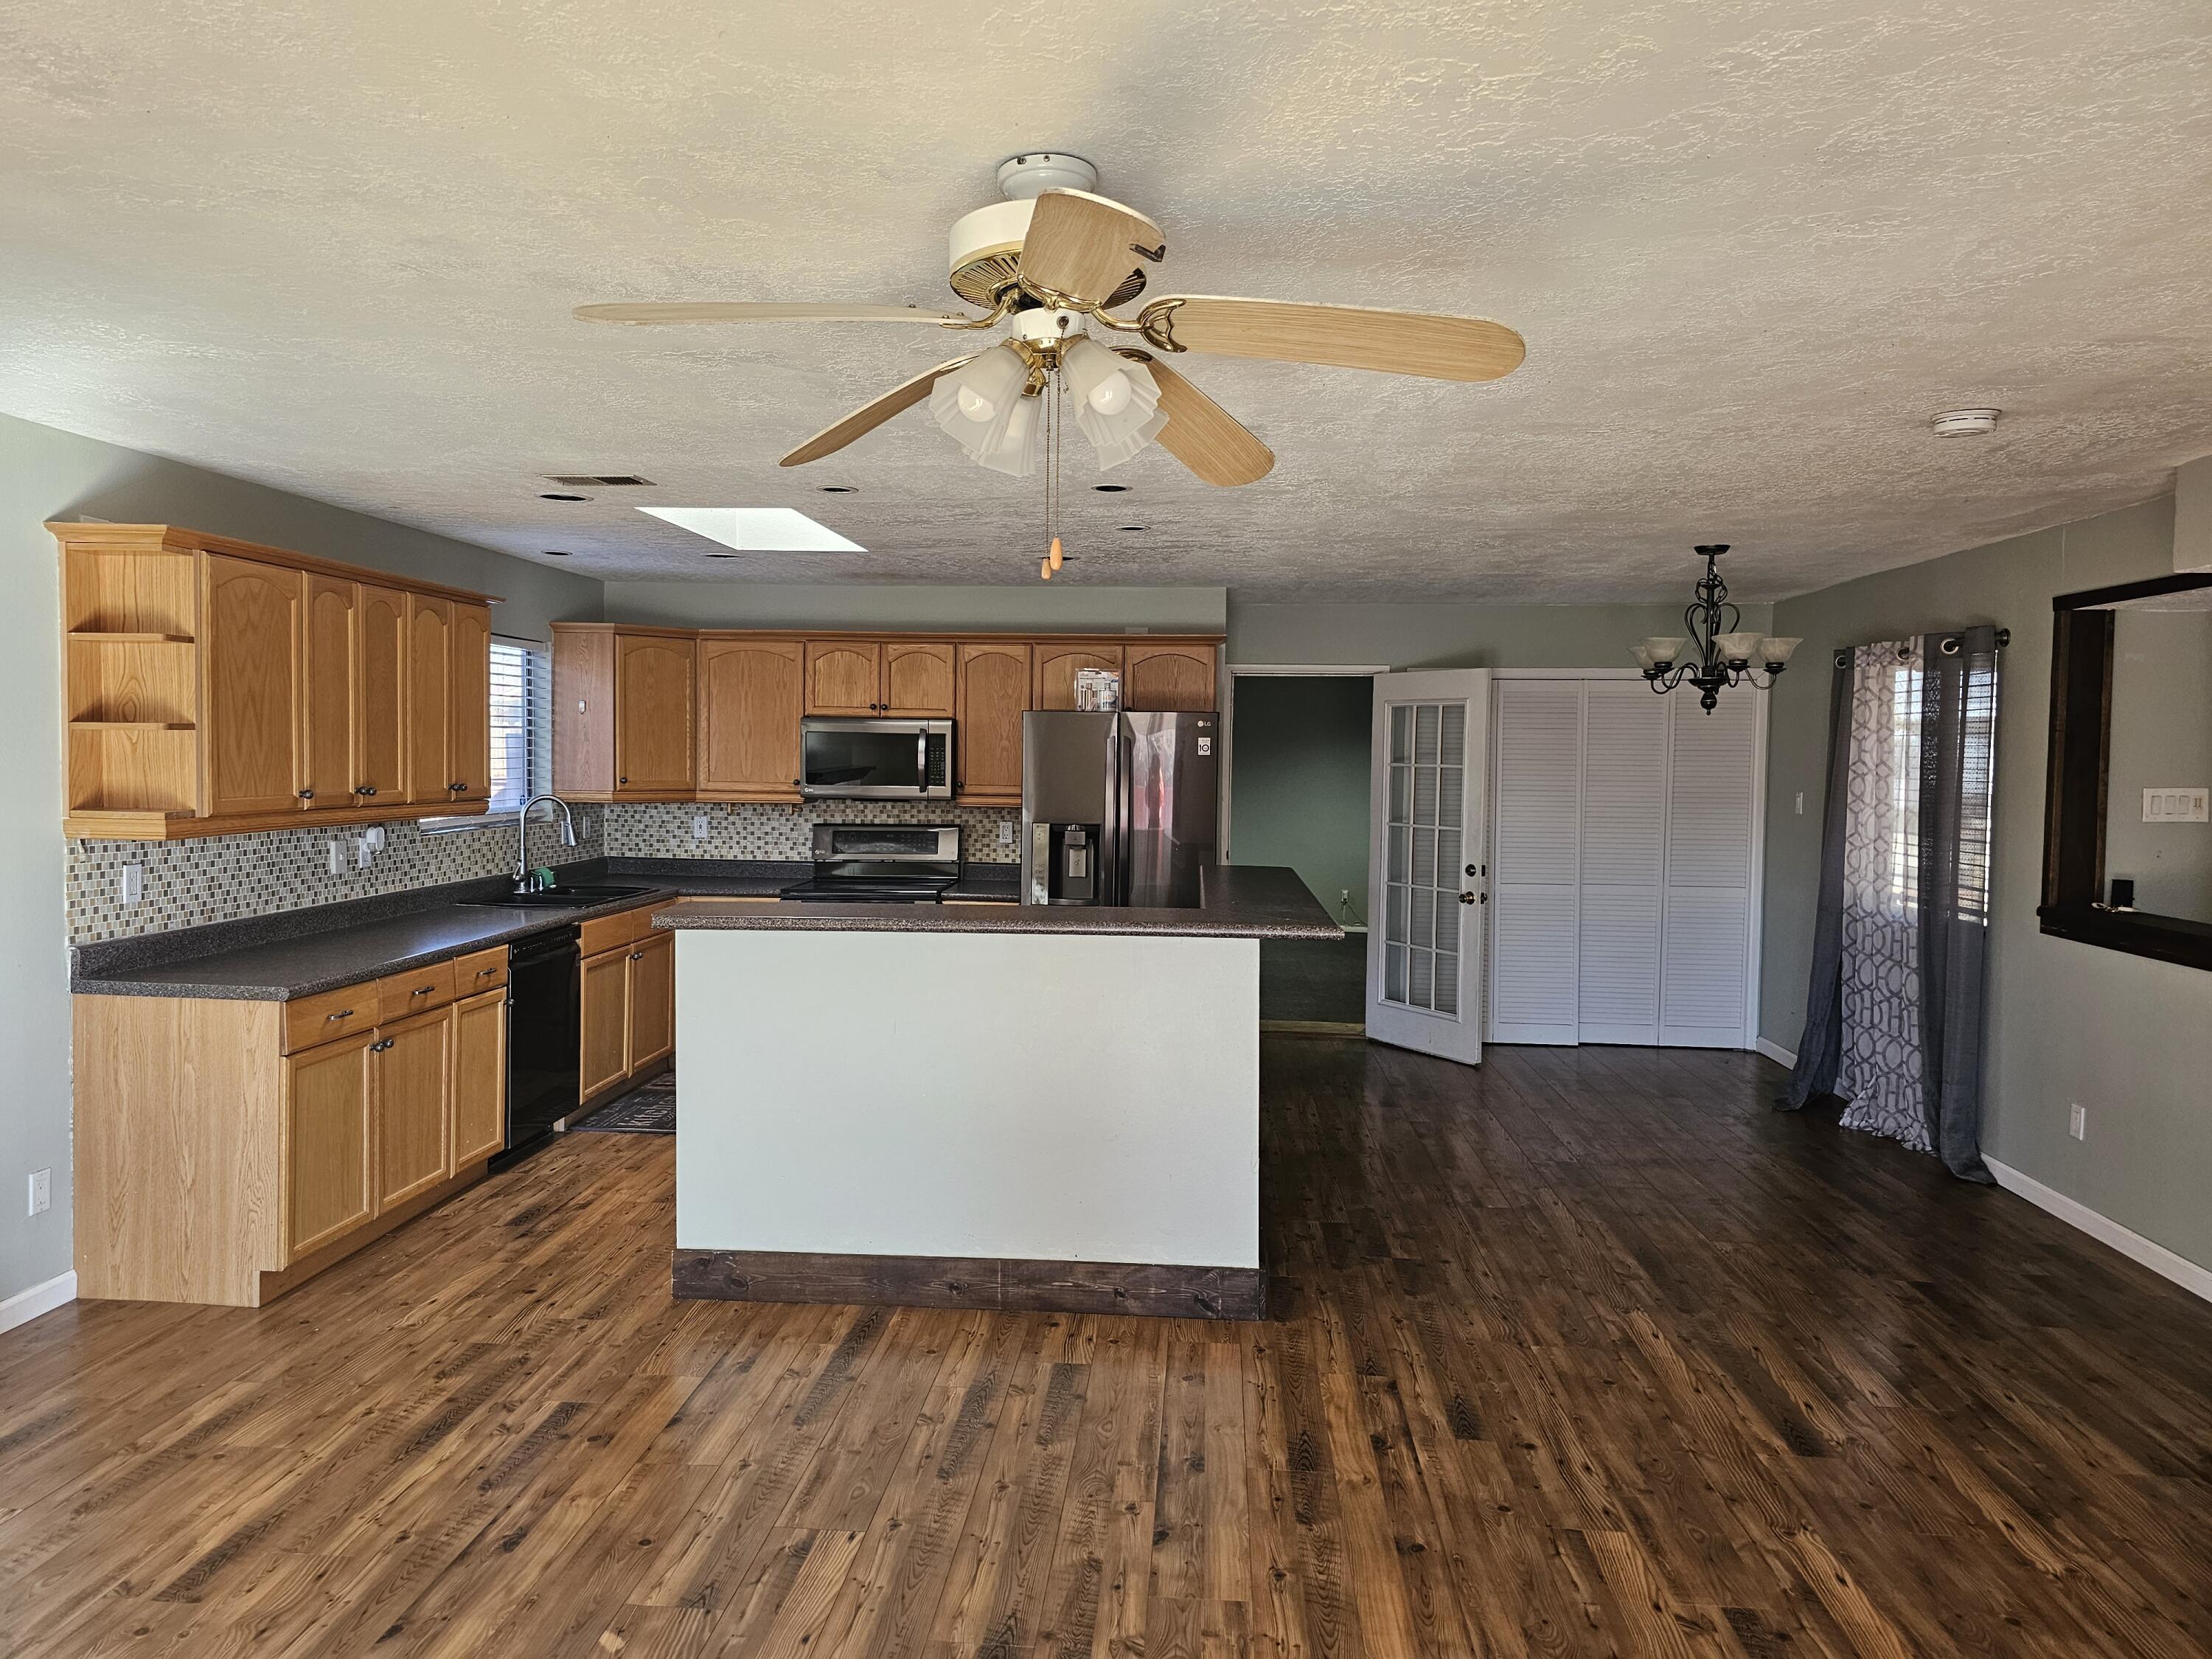 5212 Territorial Road NW, Albuquerque, New Mexico 87120, 3 Bedrooms Bedrooms, ,2 BathroomsBathrooms,Residential,For Sale,5212 Territorial Road NW,1042233